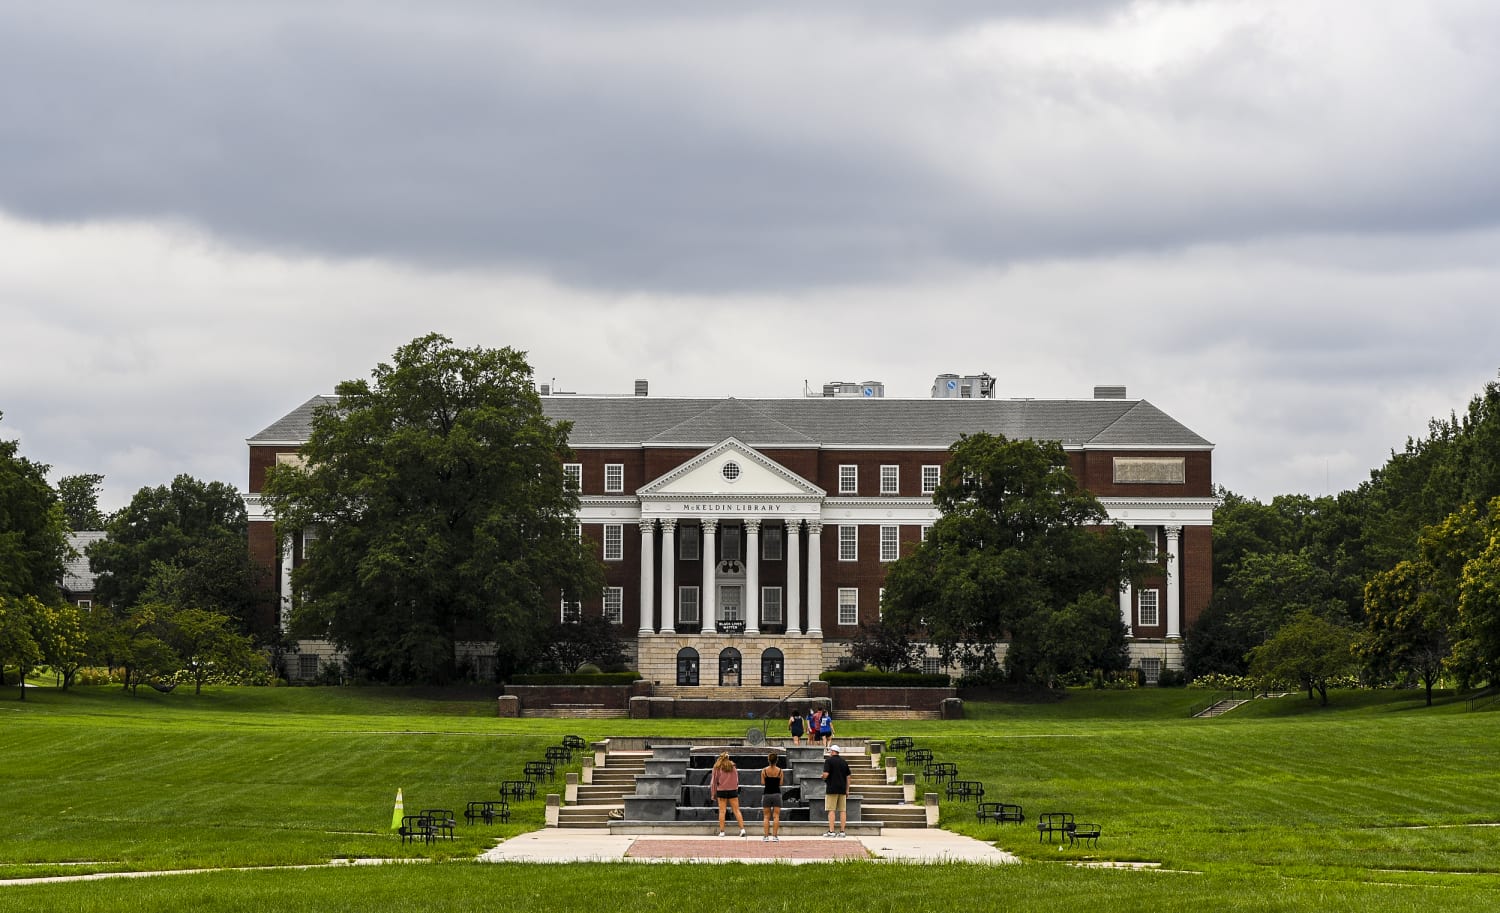 Univ. of Maryland slammed for separating Asian students from ‘students of color’ in graphic